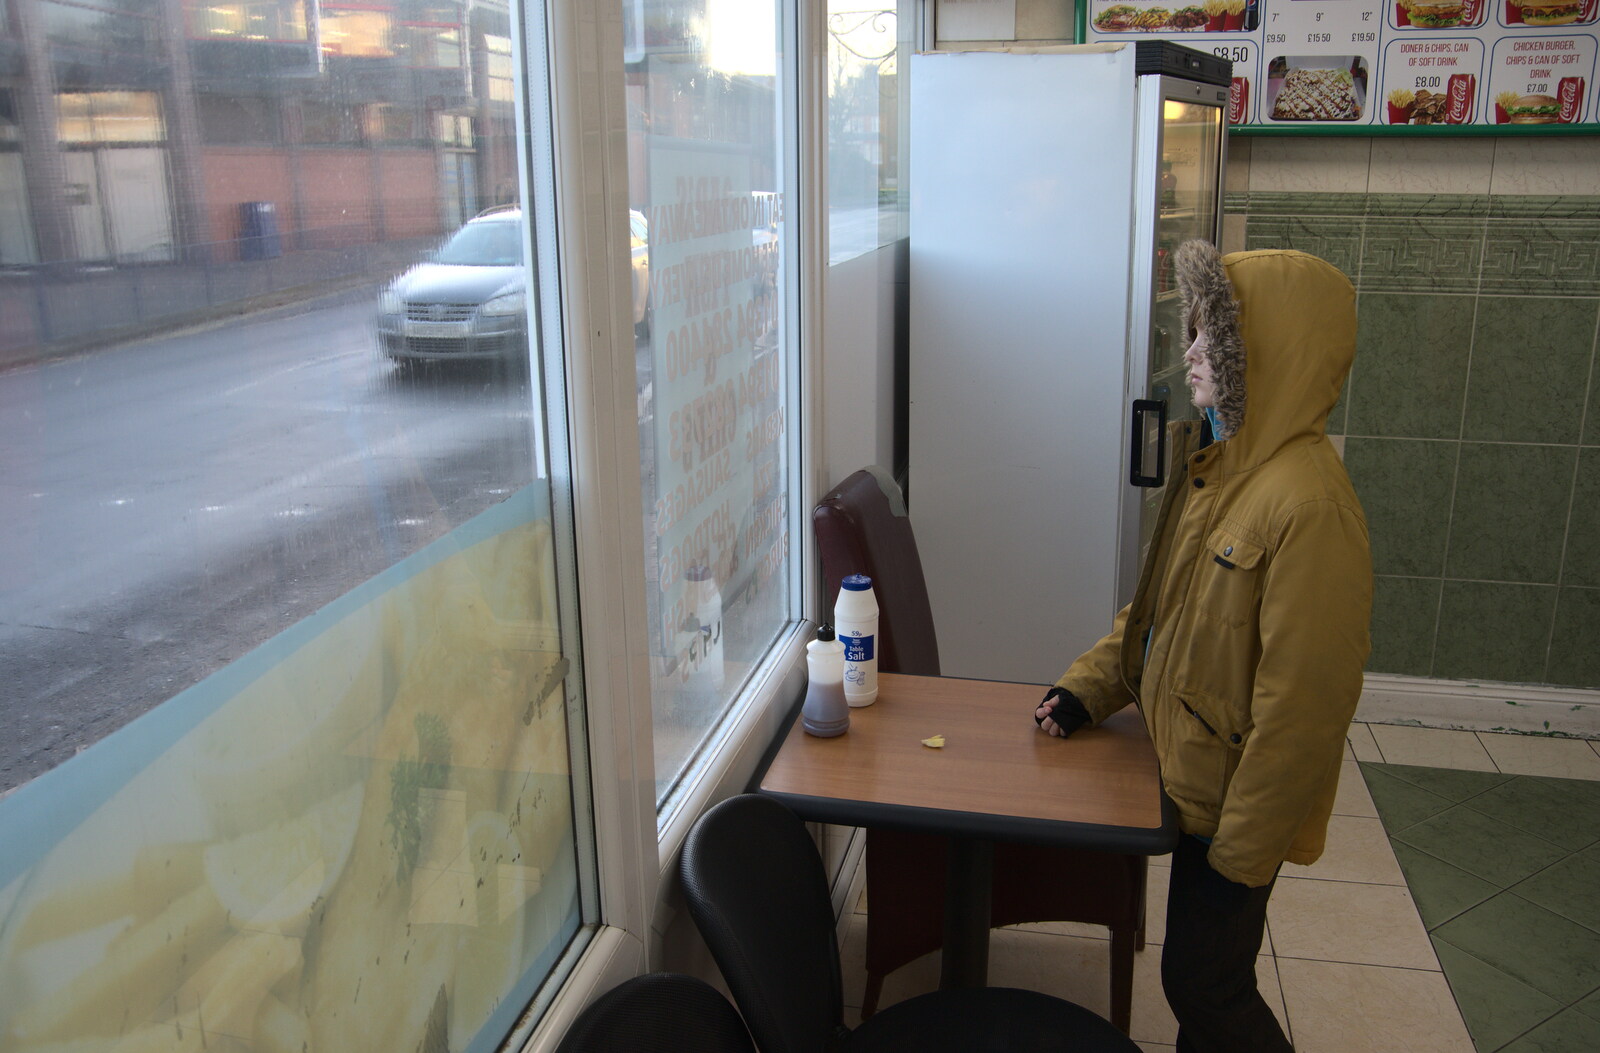 A Short Trip to Felixstowe, Suffolk - 22nd January 2023: Harry looks out of the chip-shop window